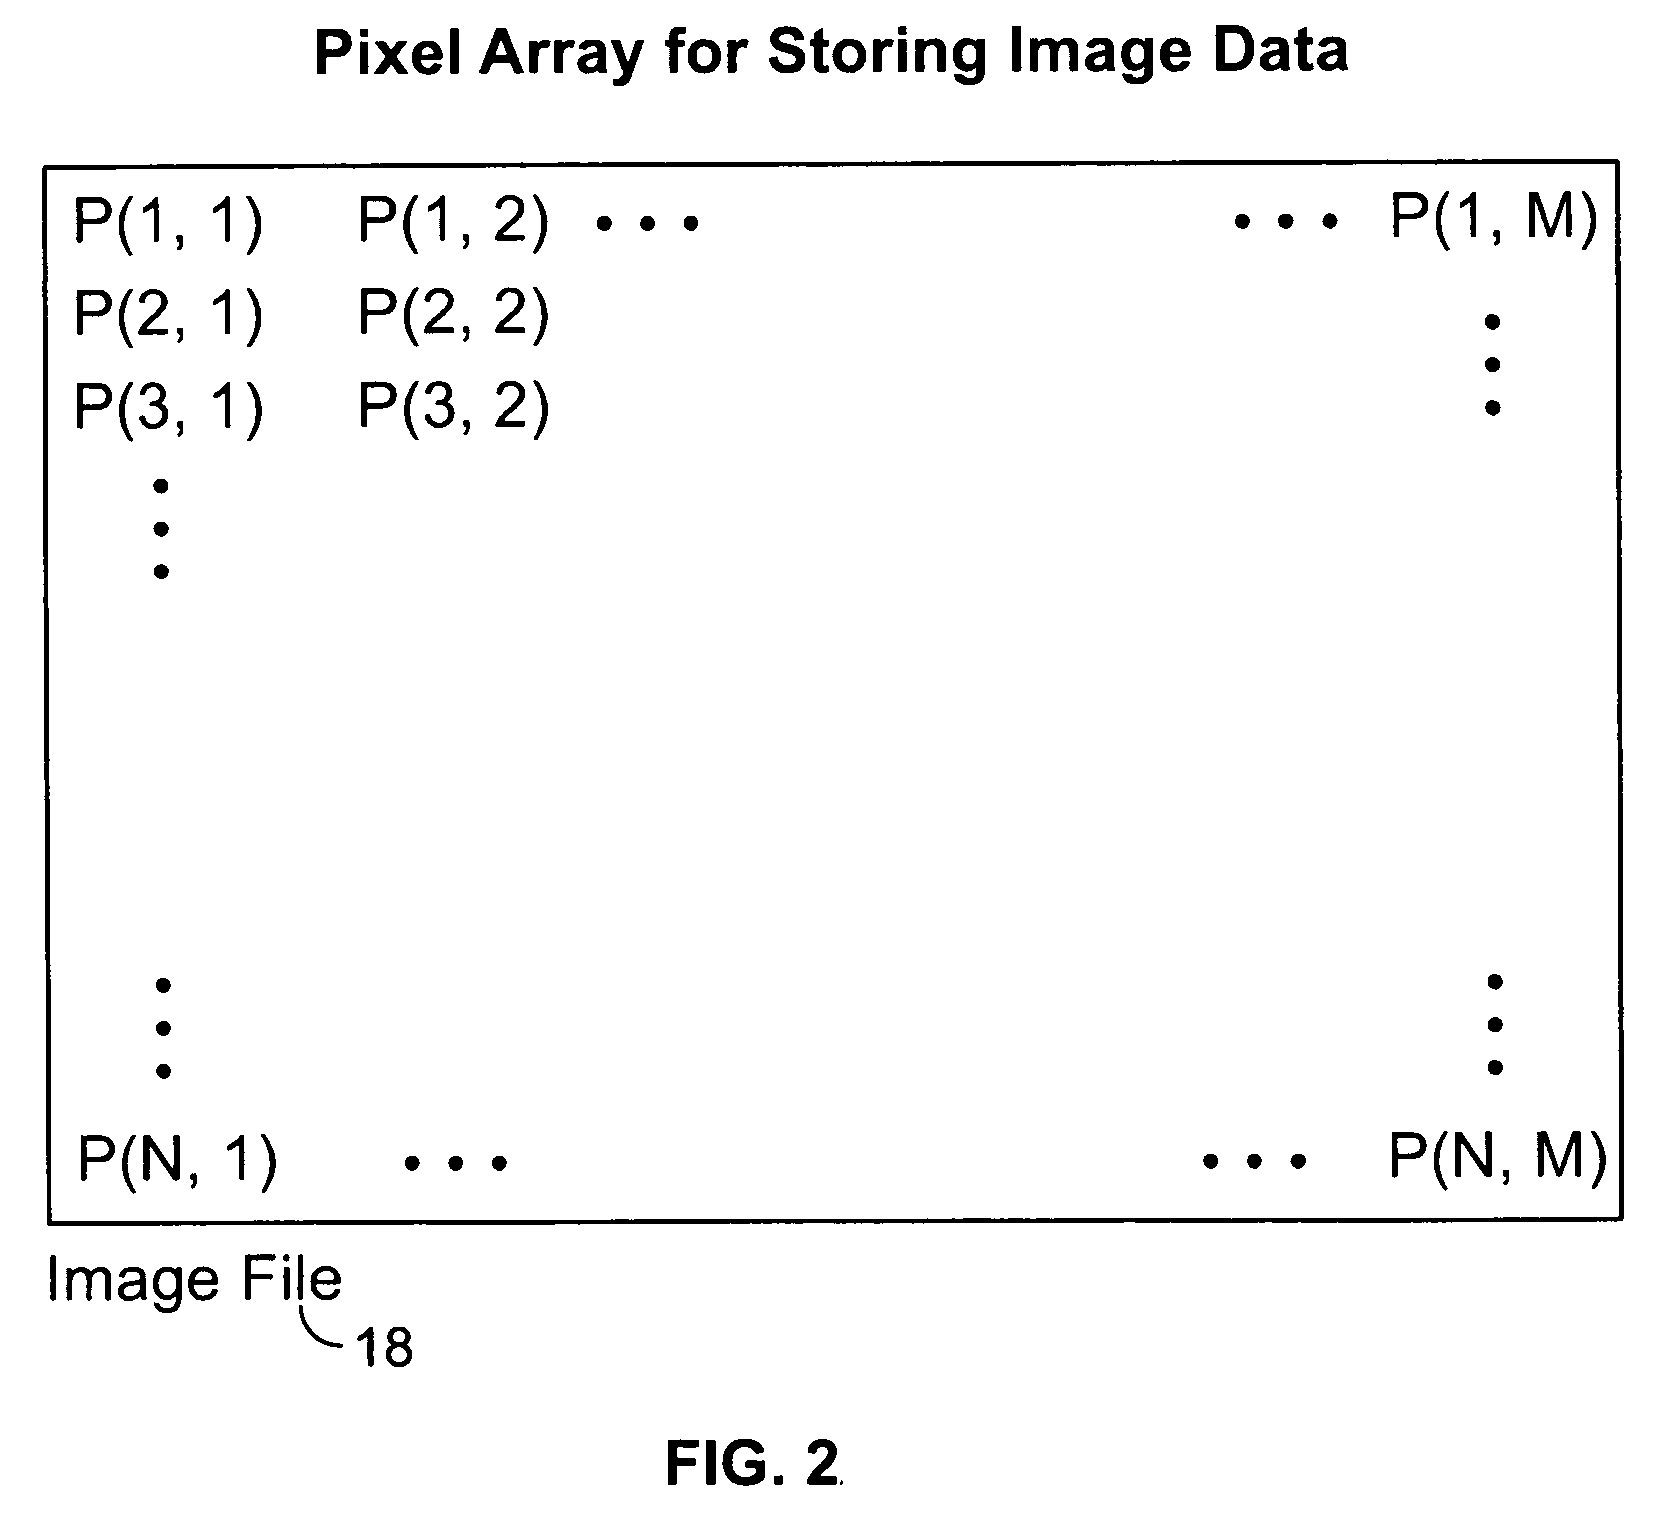 Method and system for learning a same-material constraint in an image